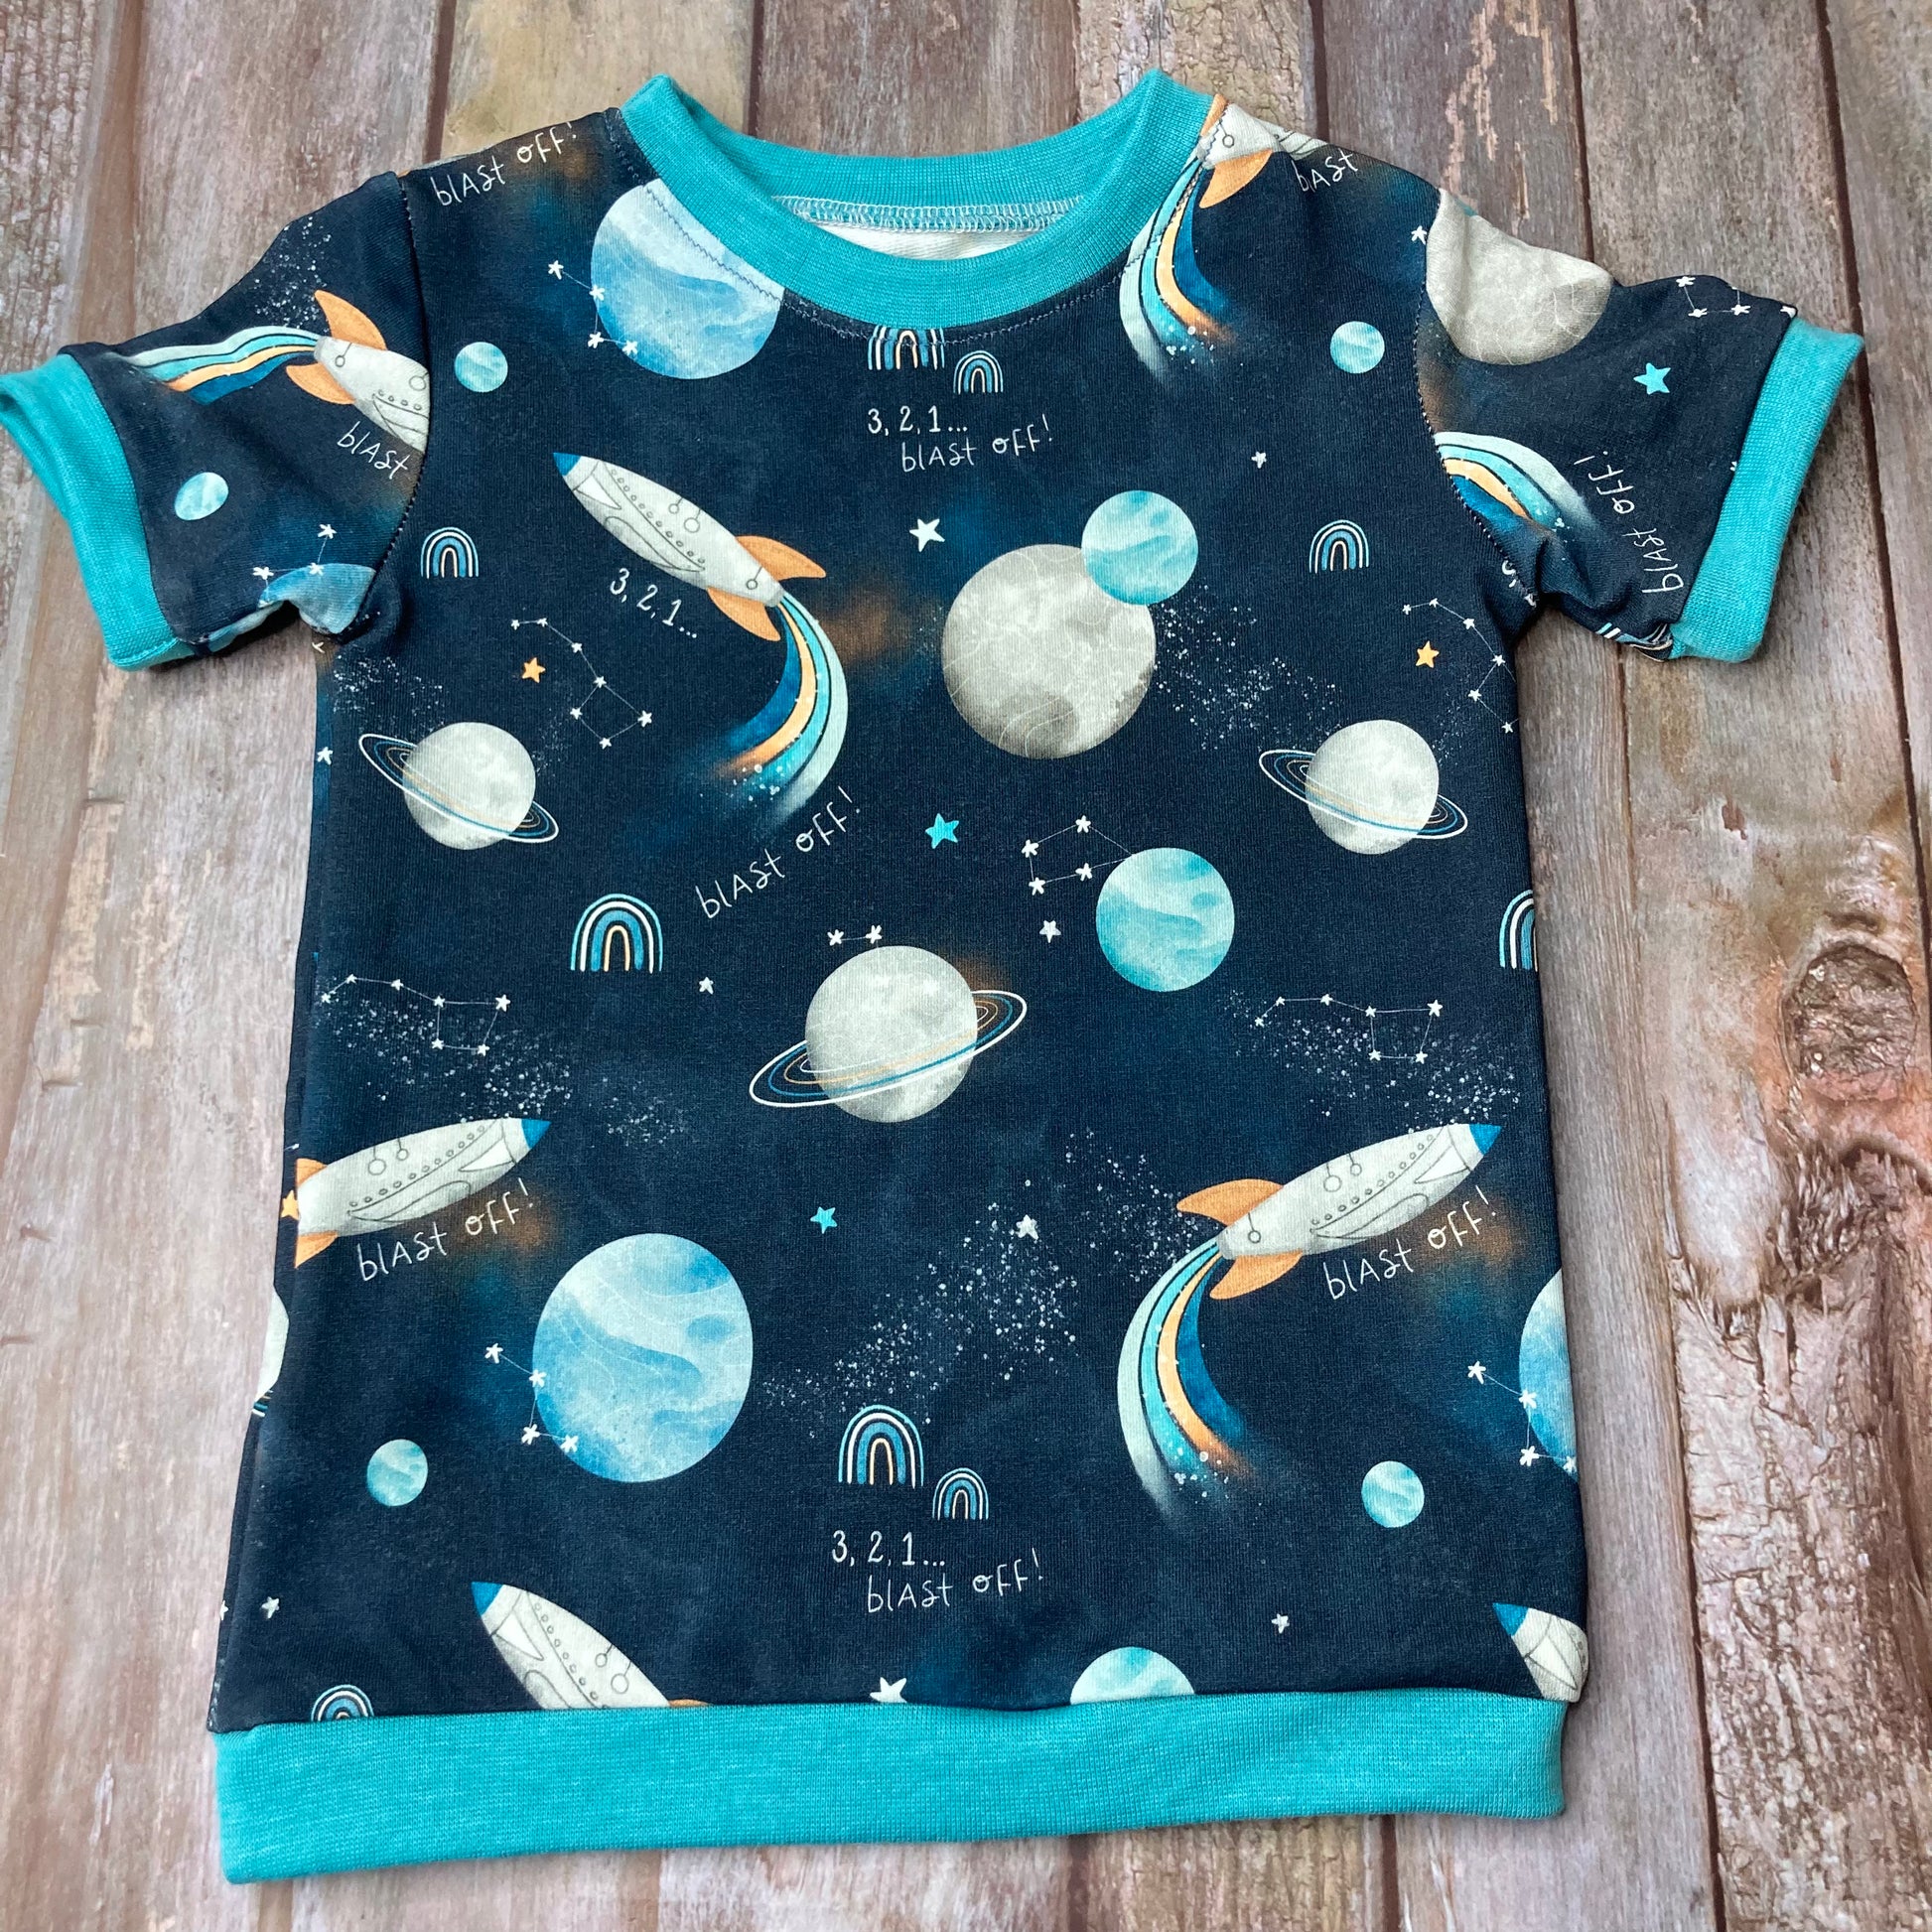 Kids Cuffed T-shirt cotton French terry - Space Rocket Blue - age 1-4 - Uphouse Crafts